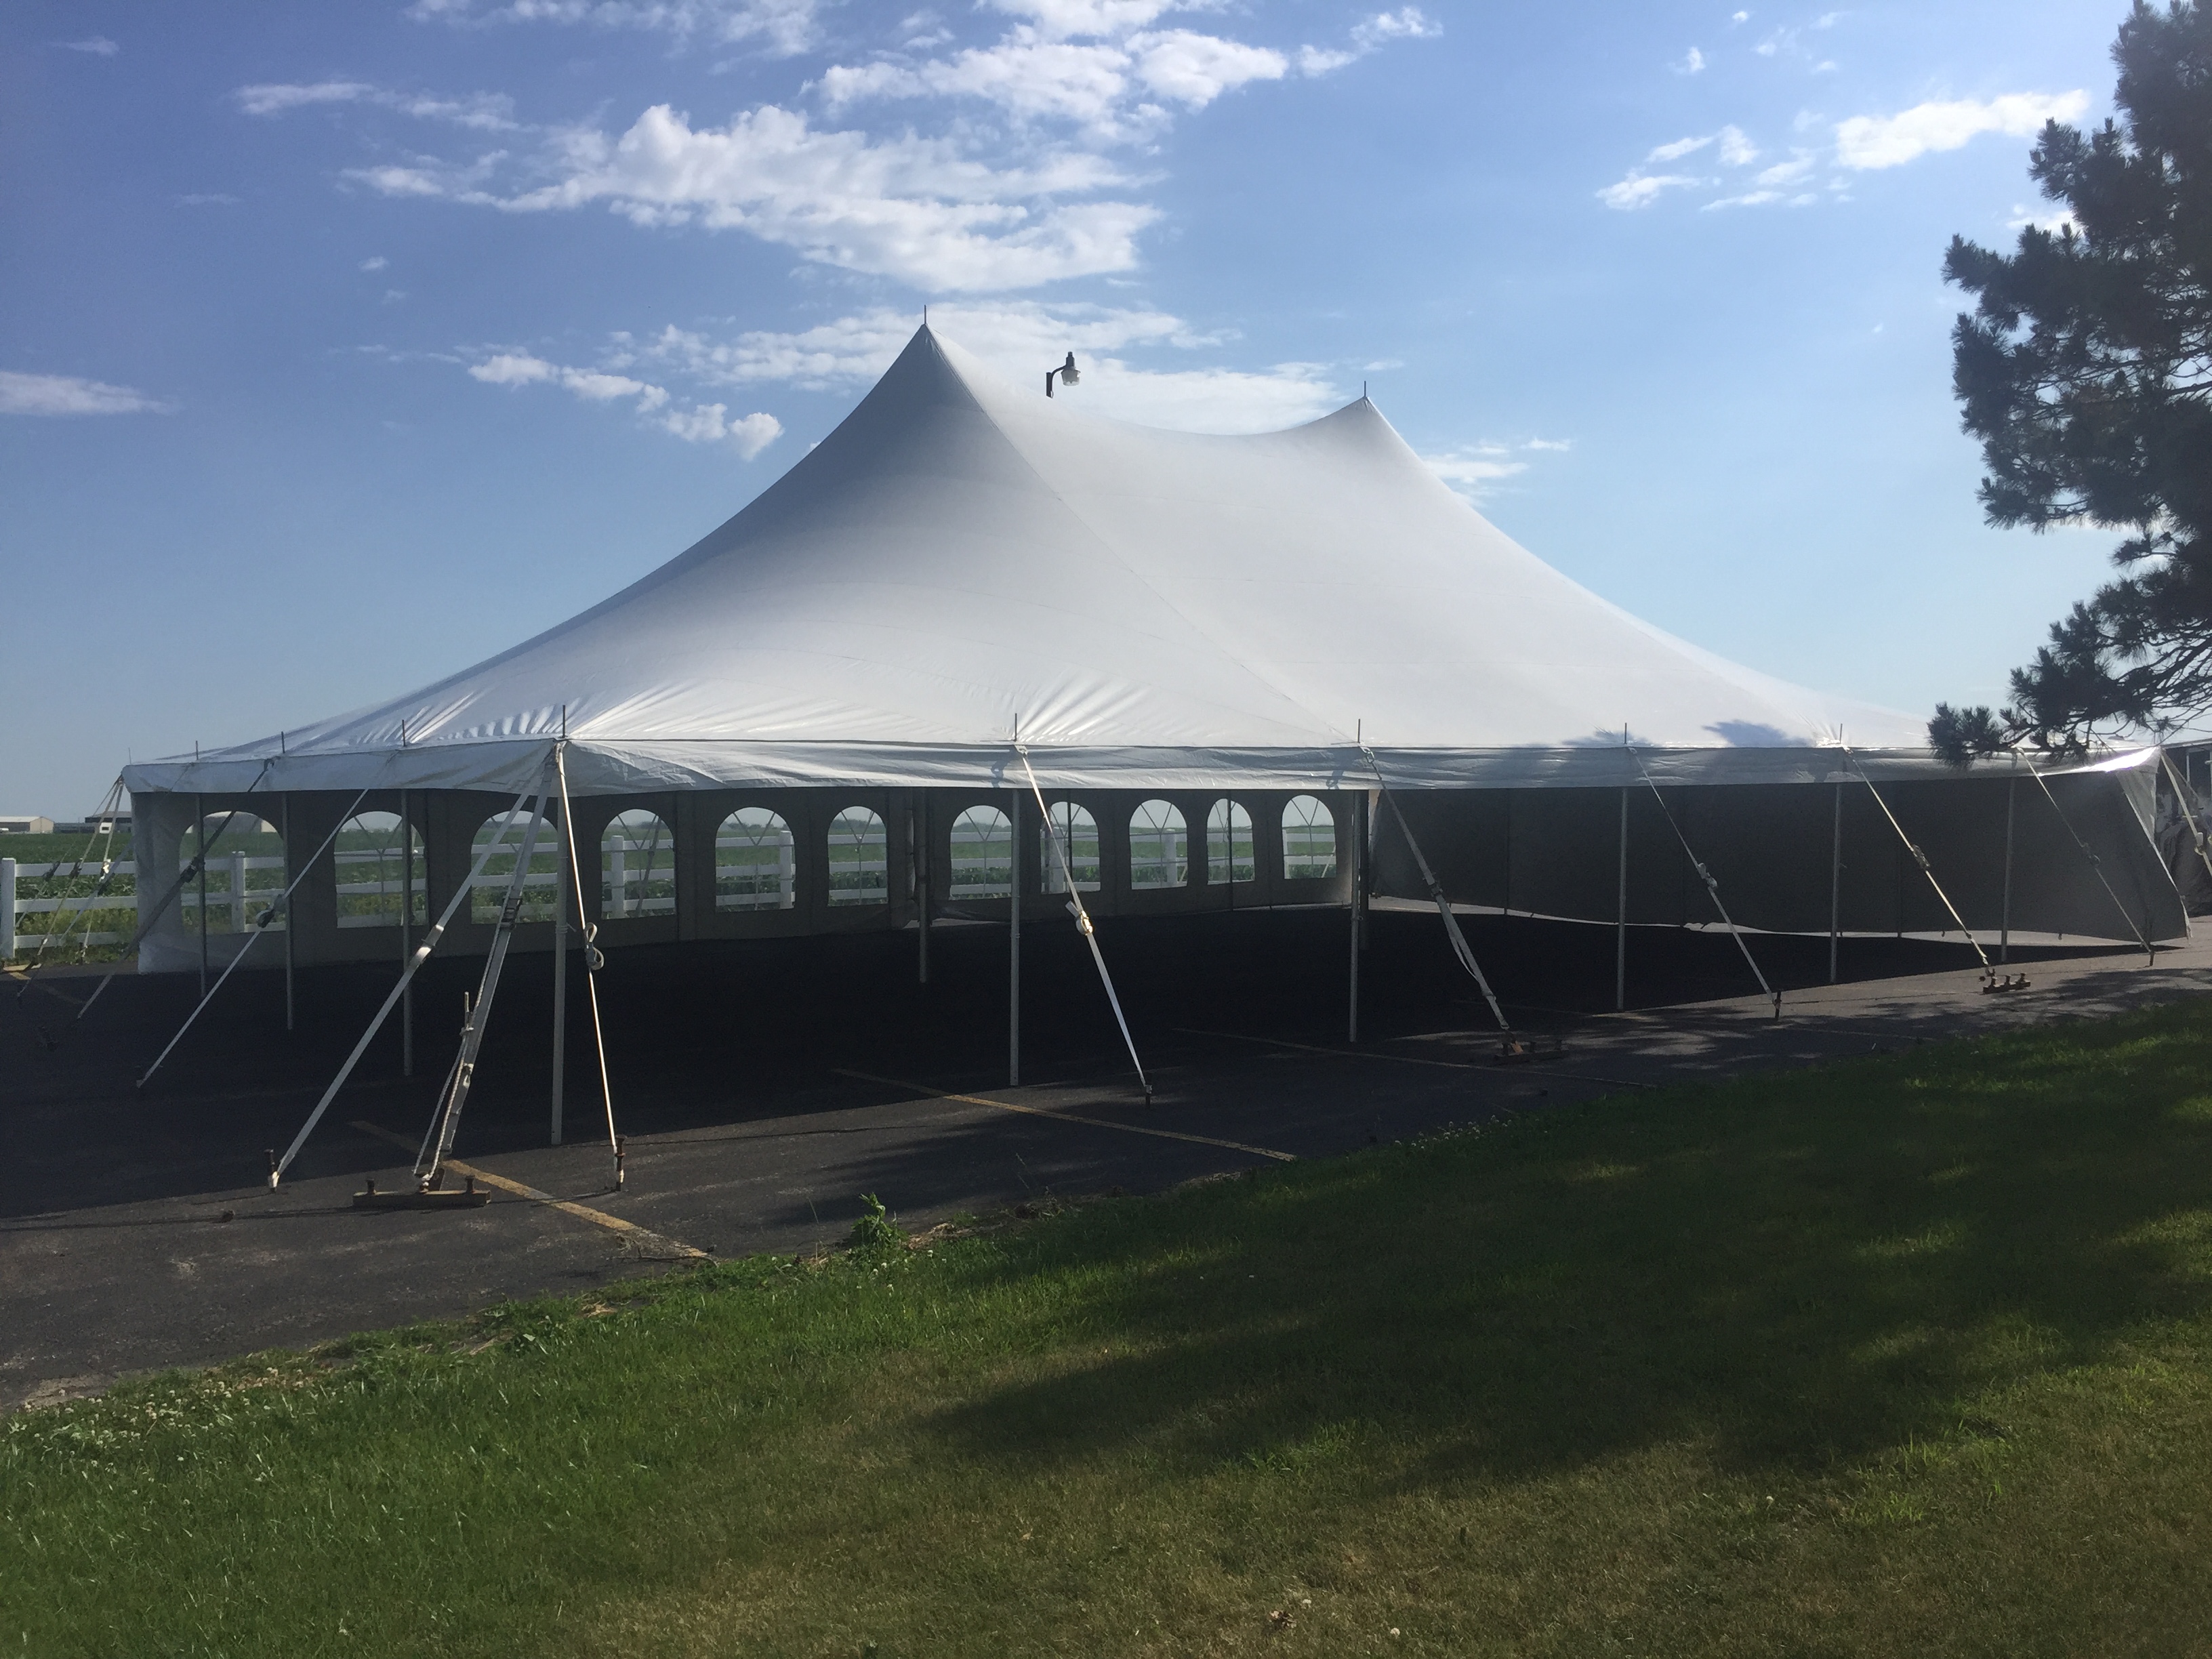 Open side of 40' x 60' rope and pole wedding tent at church in Grinnell, Iowa